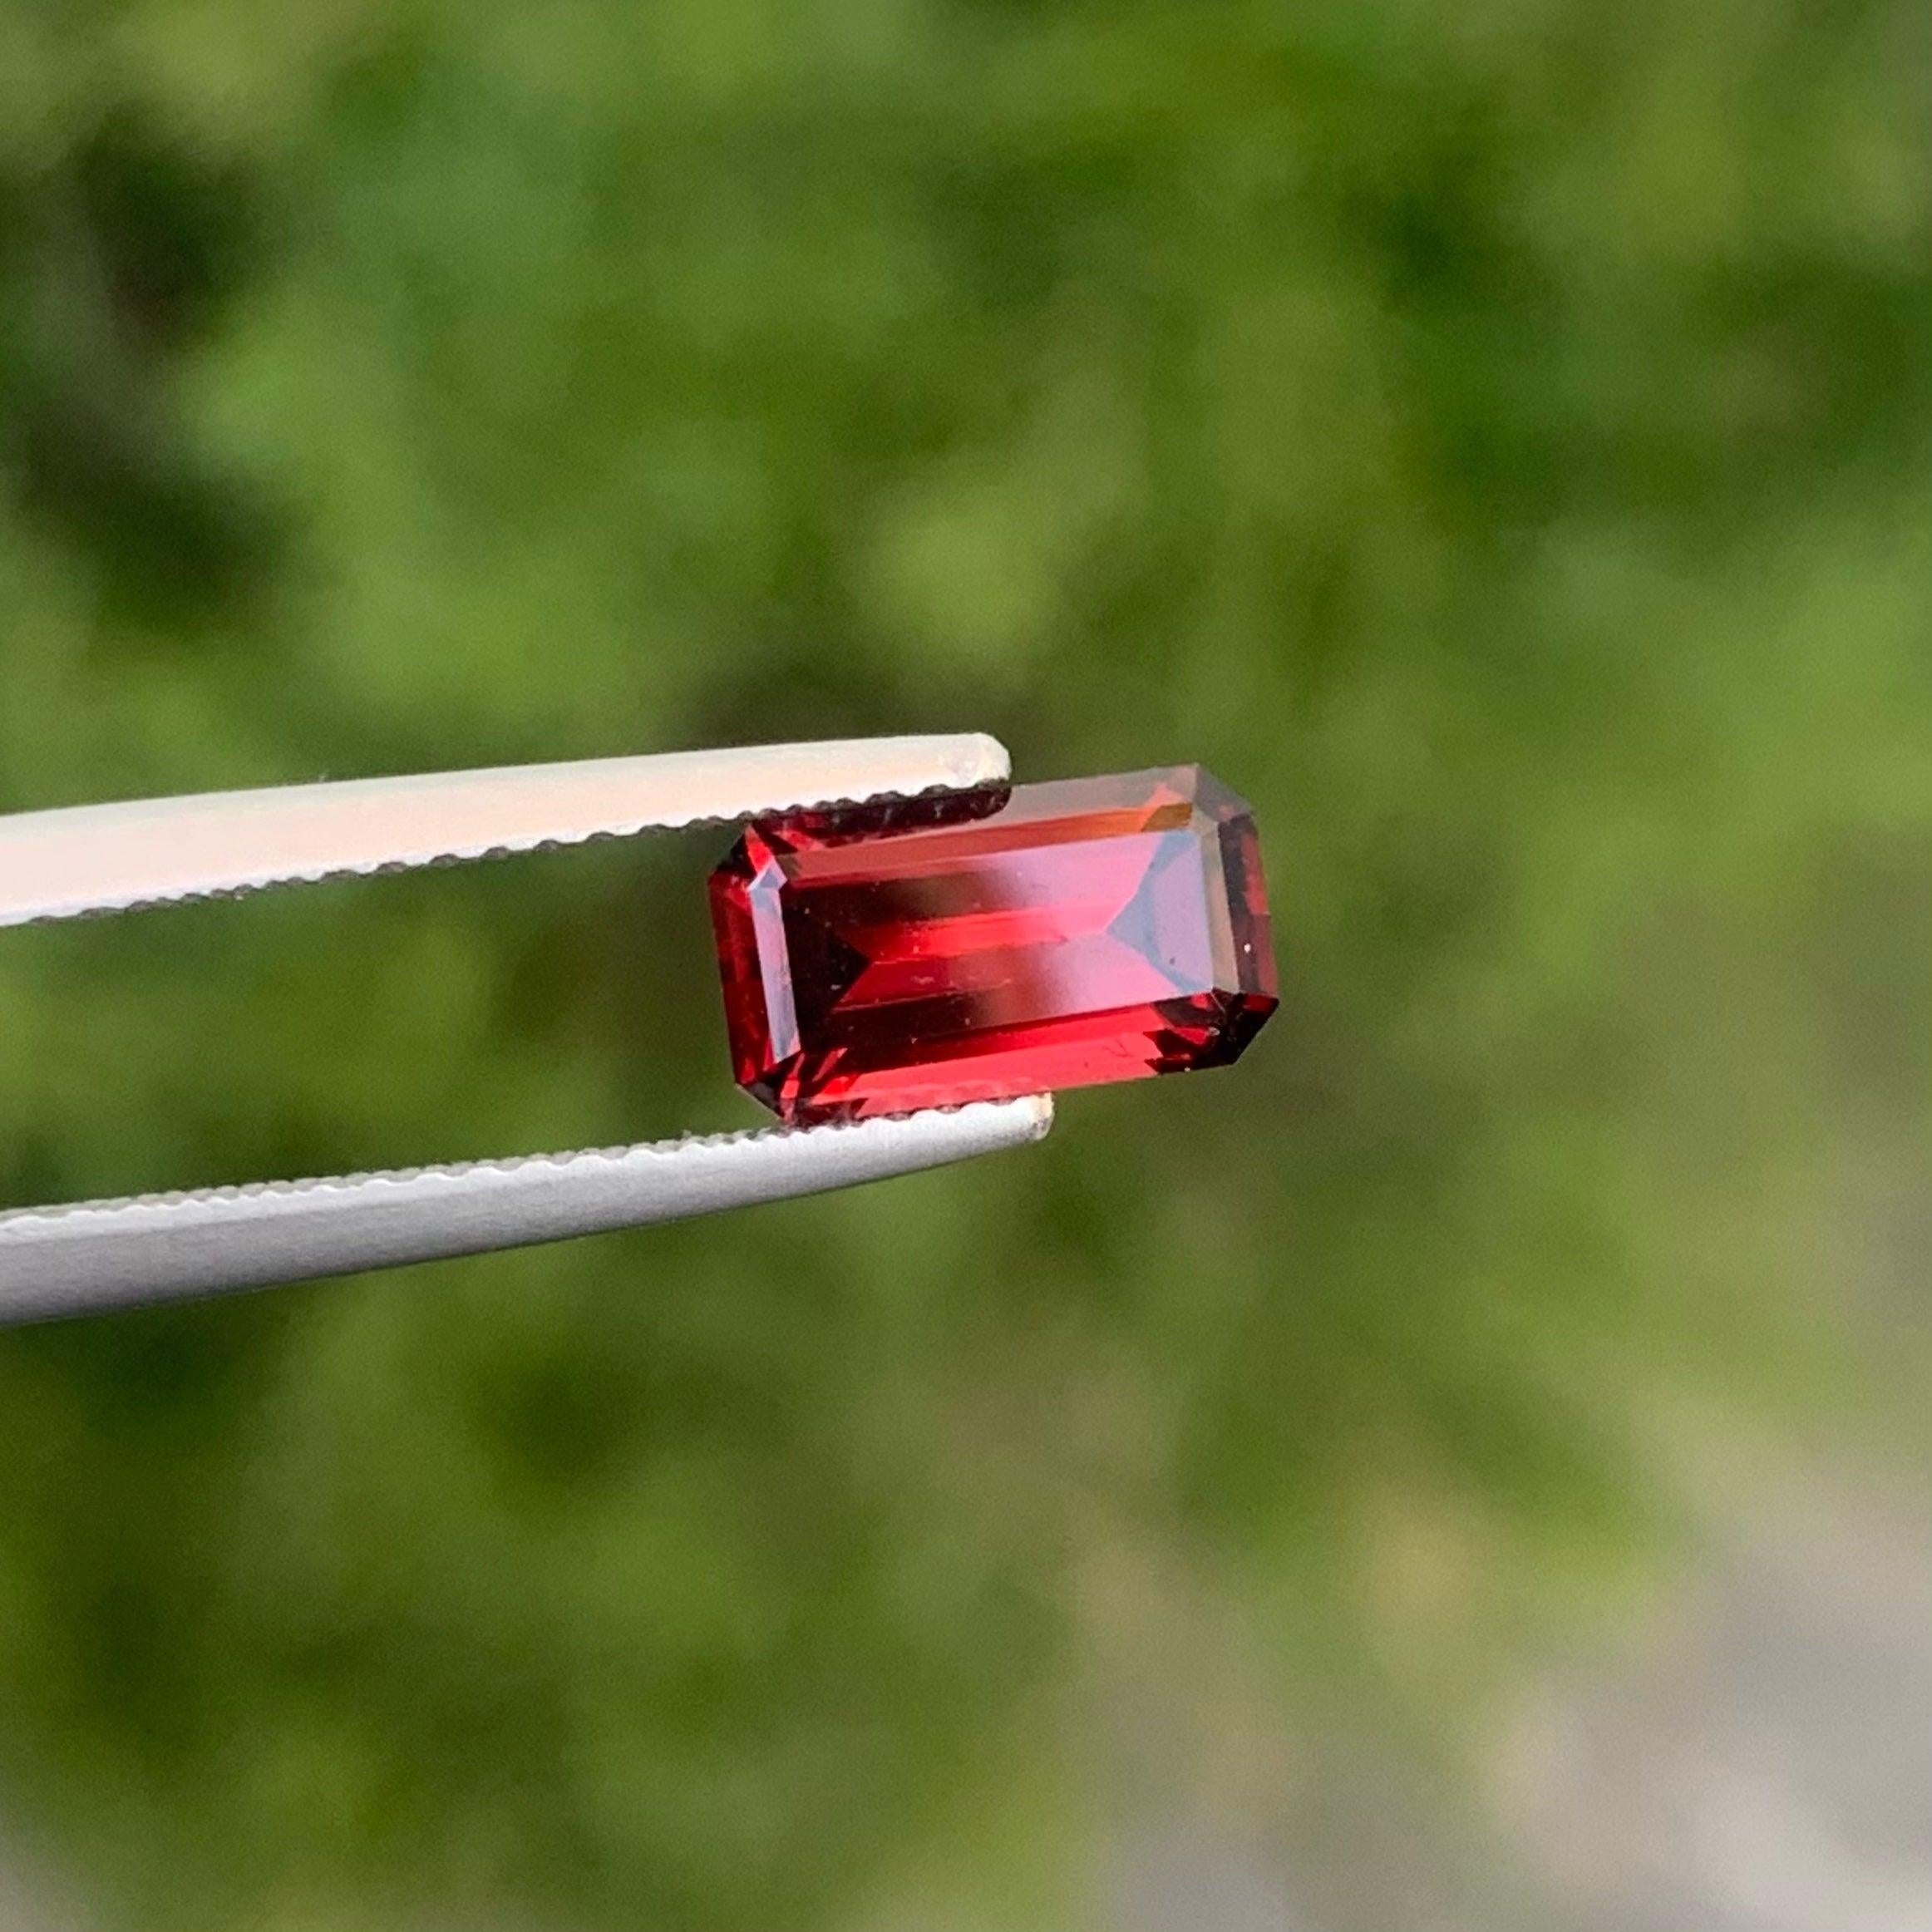 Spectacular Red Garnet For Jewelry, Available For Sale at Wholesale Price Natural High Quality 1.95 Carats Unheated  Garnet Gemstone From Madagascar.

 

Product Information:
GEMSTONE NAME: Spectacular Red Garnet For Jewelry
WEIGHT: 1.95